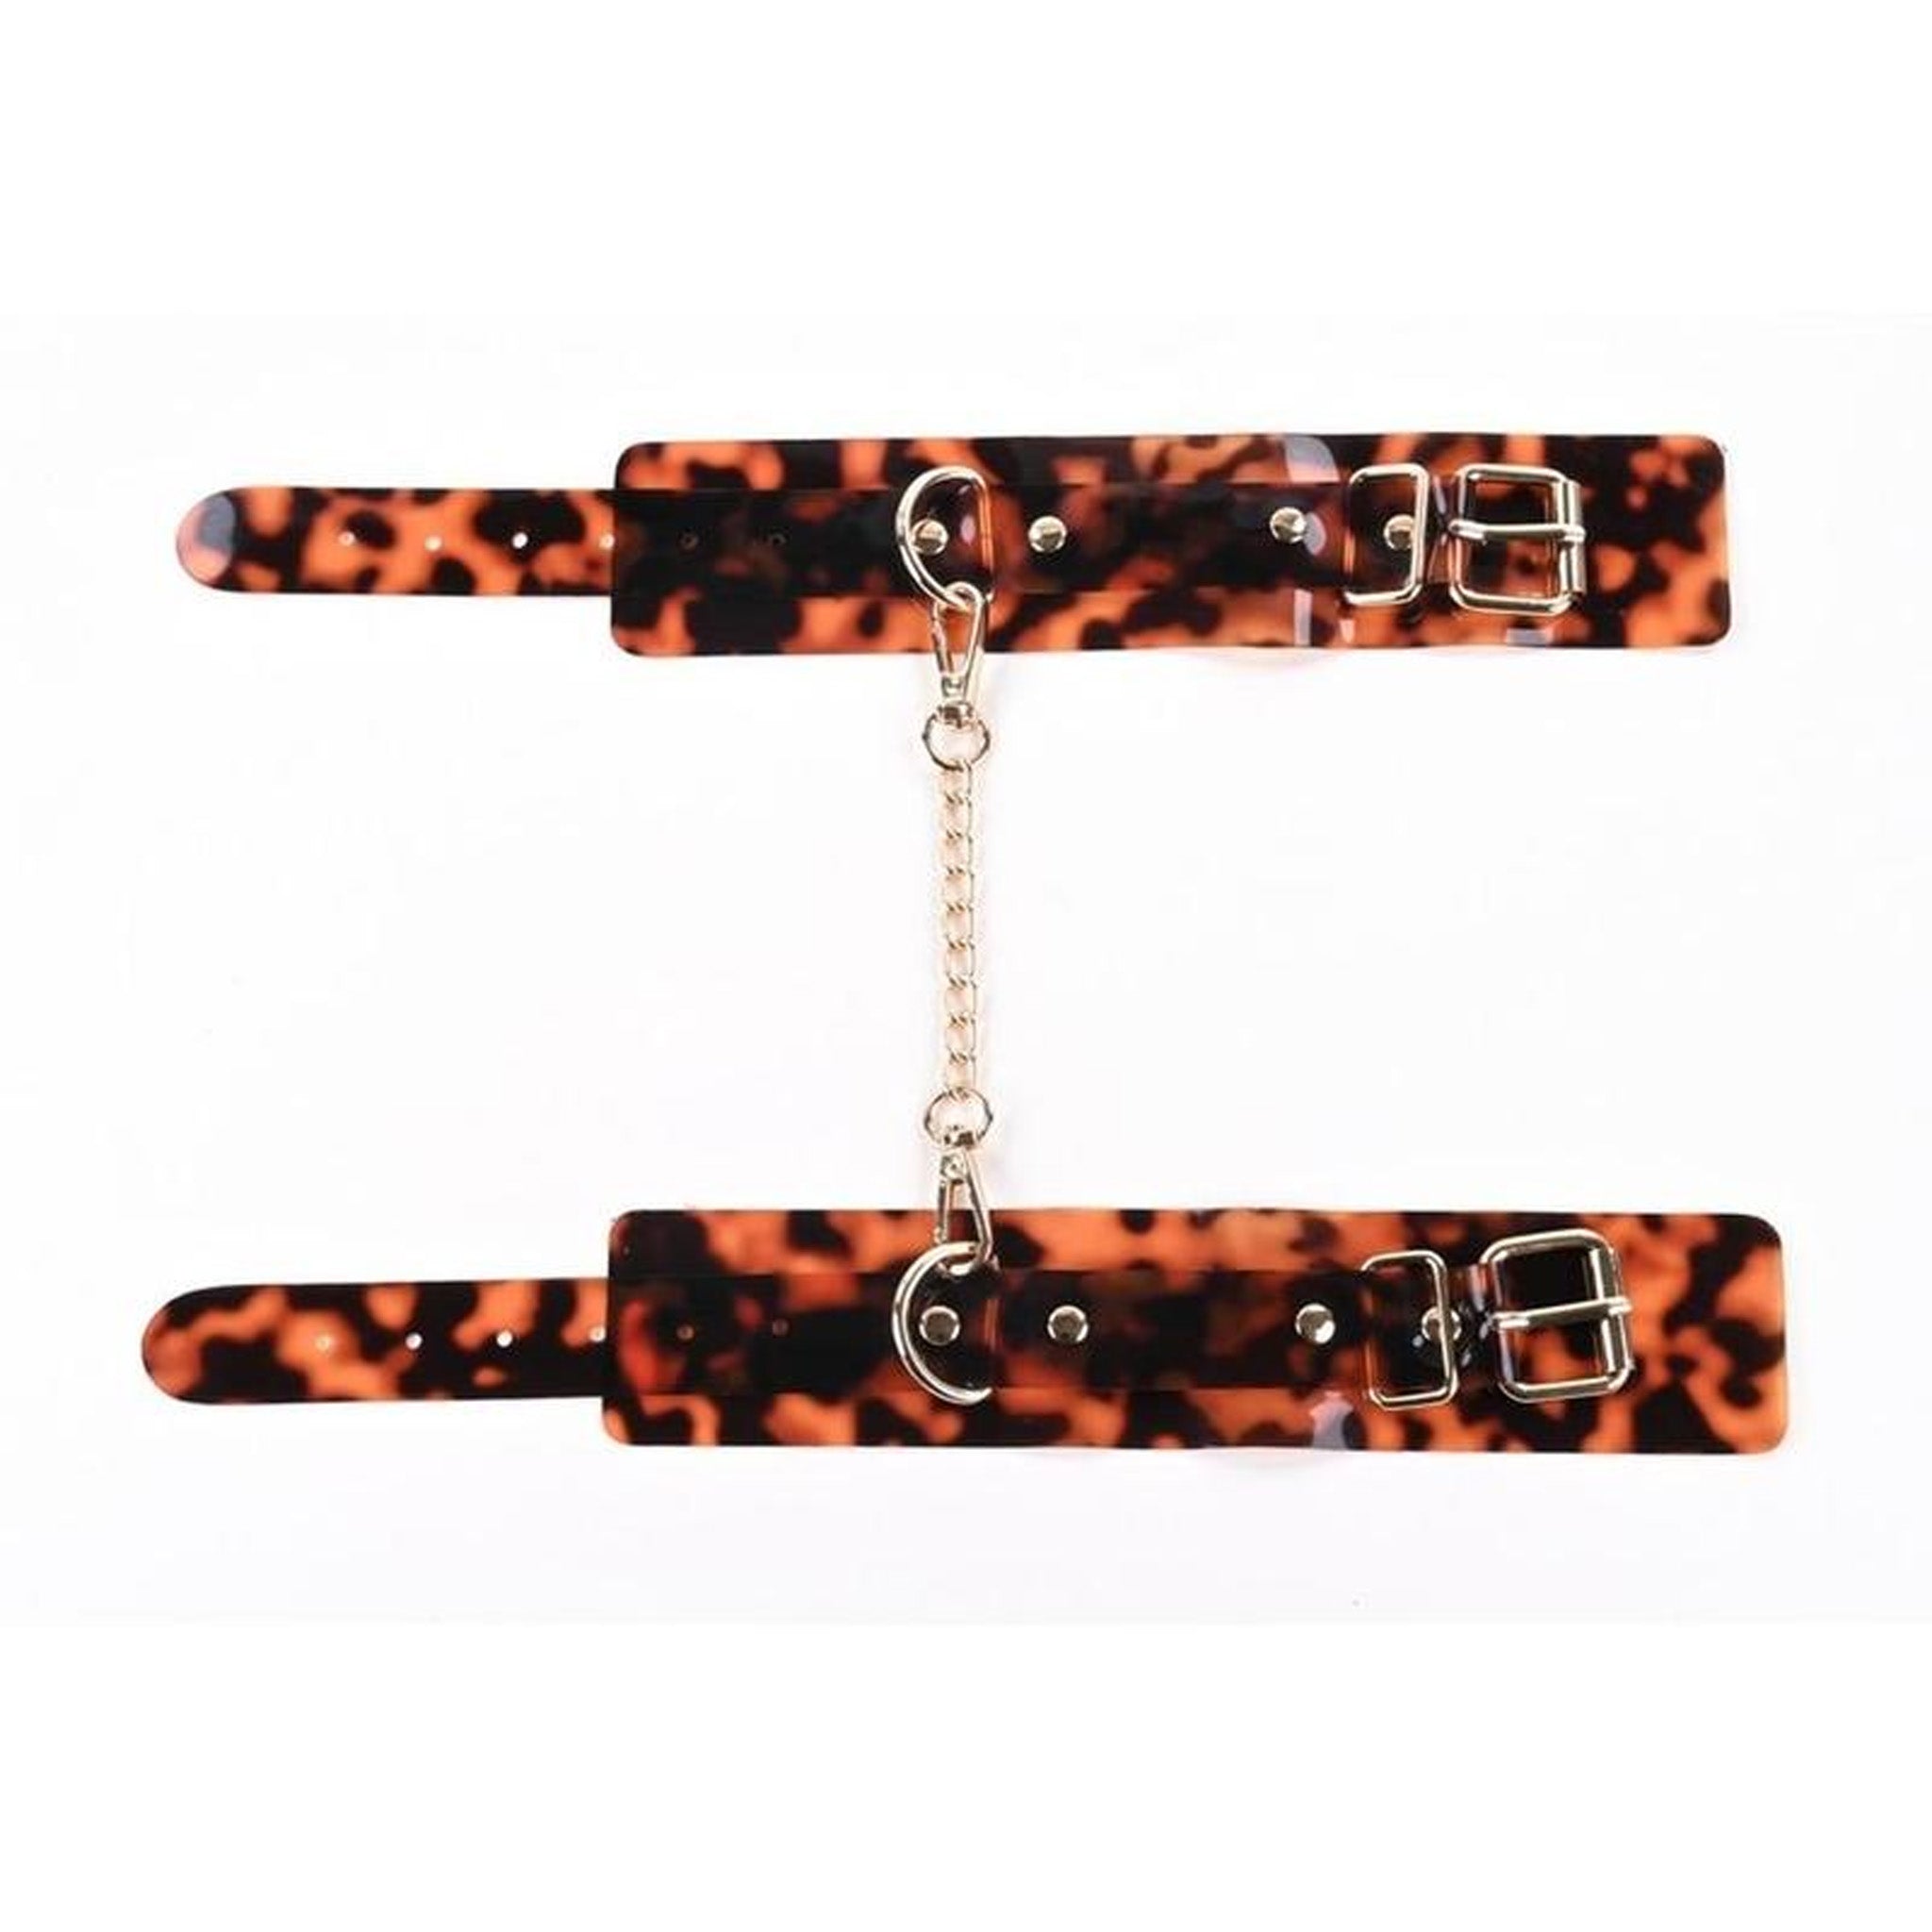 Animal Print PVC Wrist Cuffs with Gold Connecting Chain